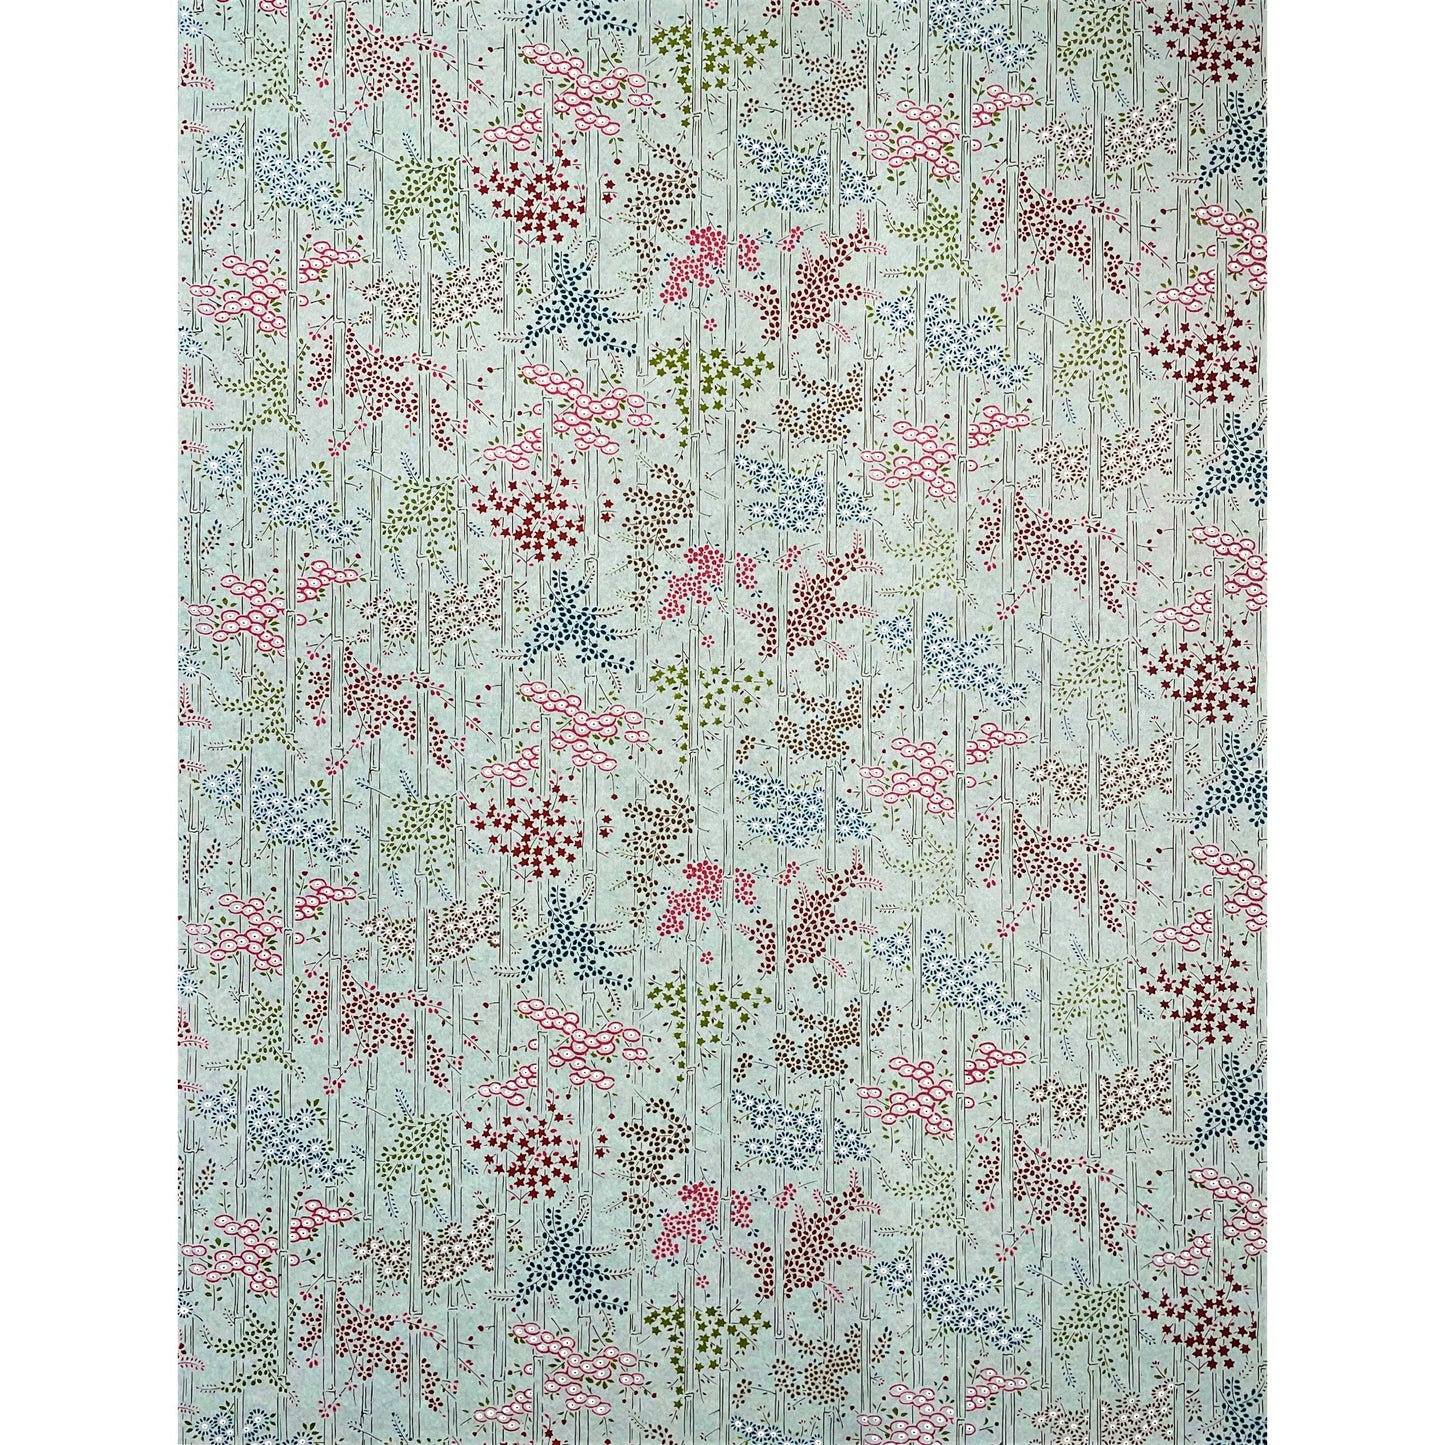 japanese silk-screen handmade paper showing pattern of bamboo, flowers and foliage on light teal backdrop, full sheet view